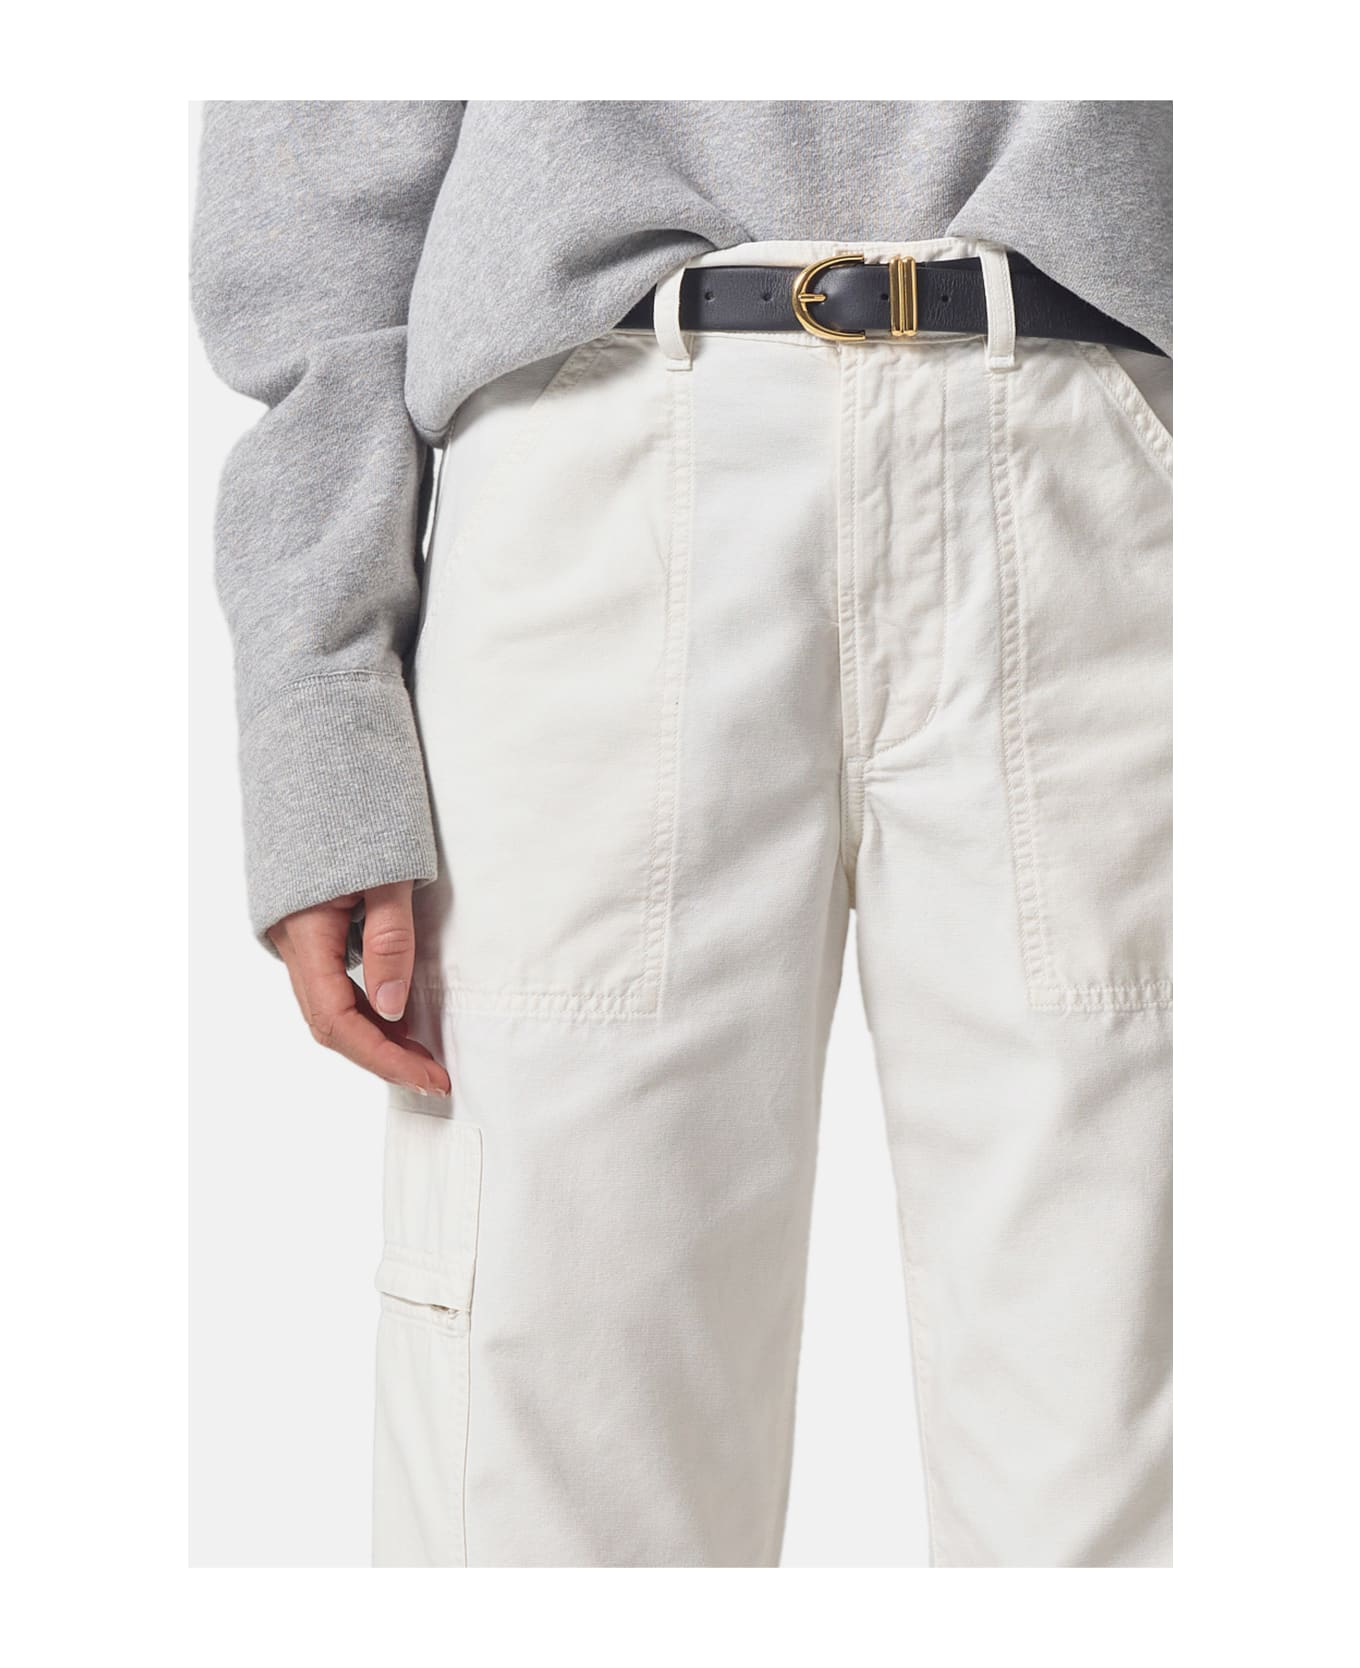 Citizens of Humanity Marcelle Cargo Pants - White ジャンプスーツ